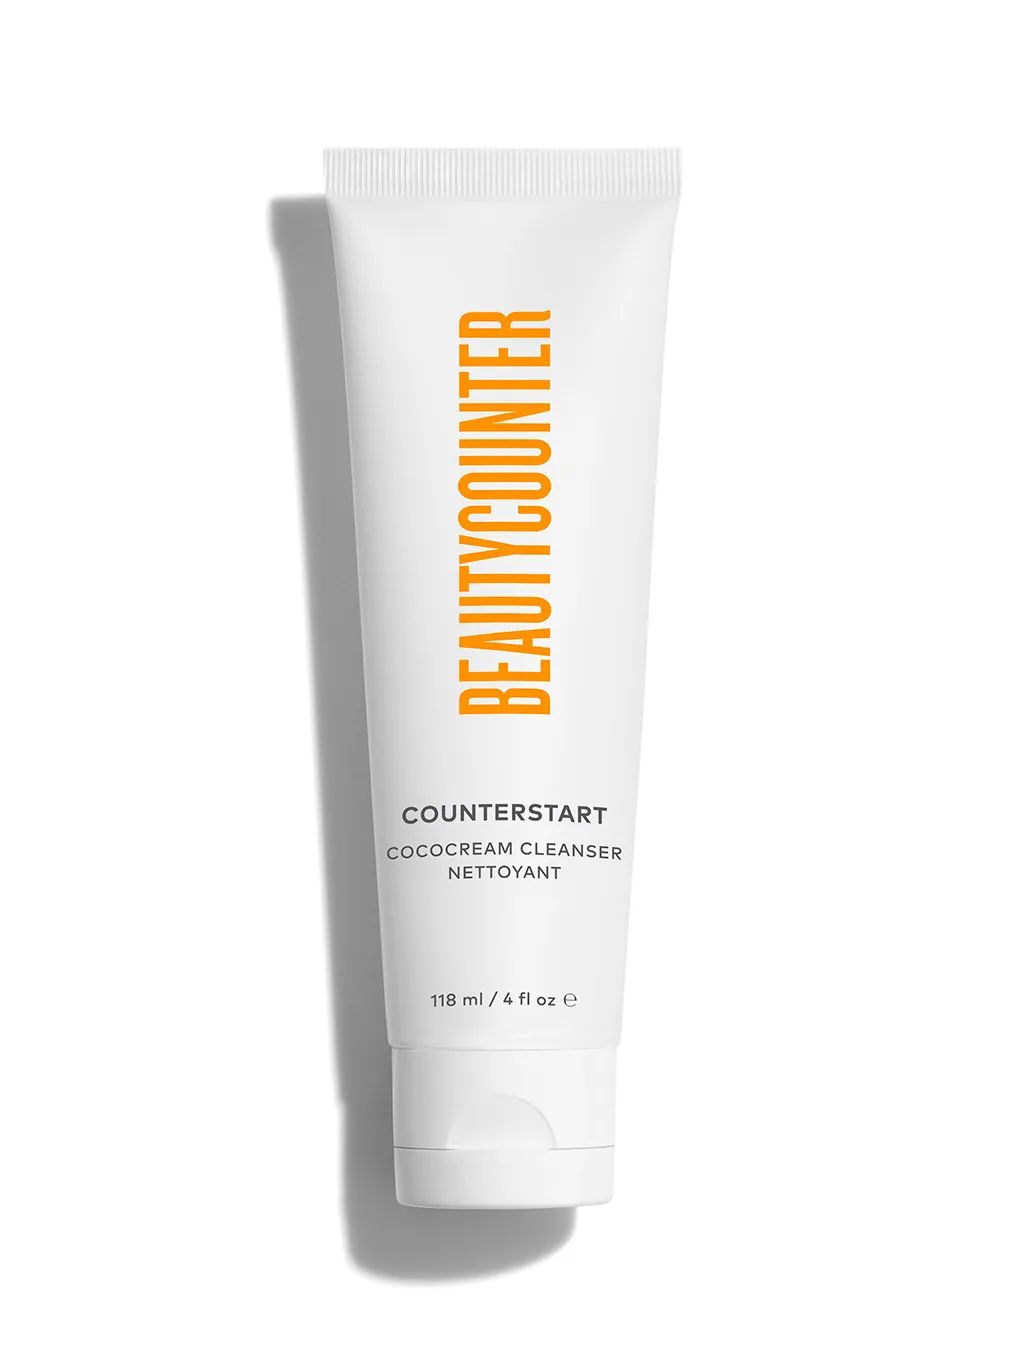 Counterstart Cococream Cleanser - Beautycounter - Skin Care, Makeup, Bath and Body and more! | Beautycounter.com